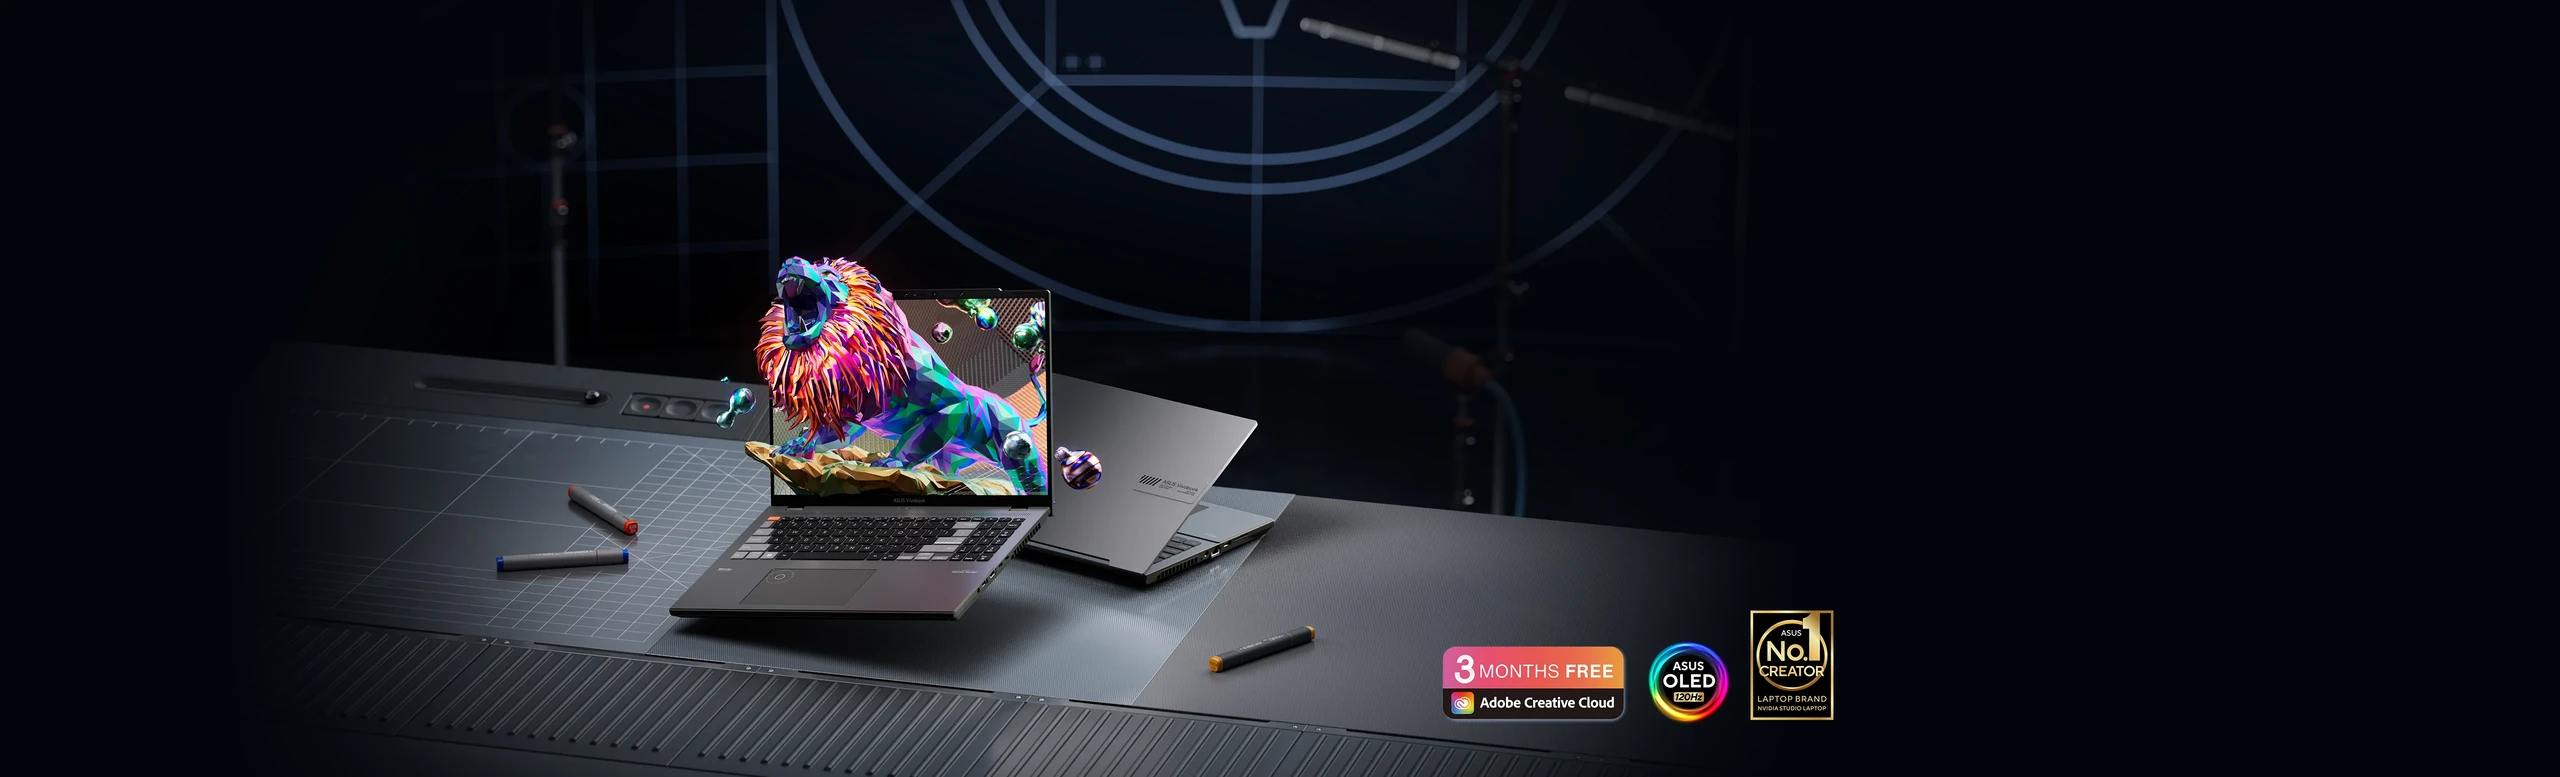 A silver and black model of the Vivobook Pro 16X 3D OLED are shown with the black model showing the in-screen of a lion roaring. The No1 Creator, ASUS Badge and Adobe 3 month logo are placed under the two models.